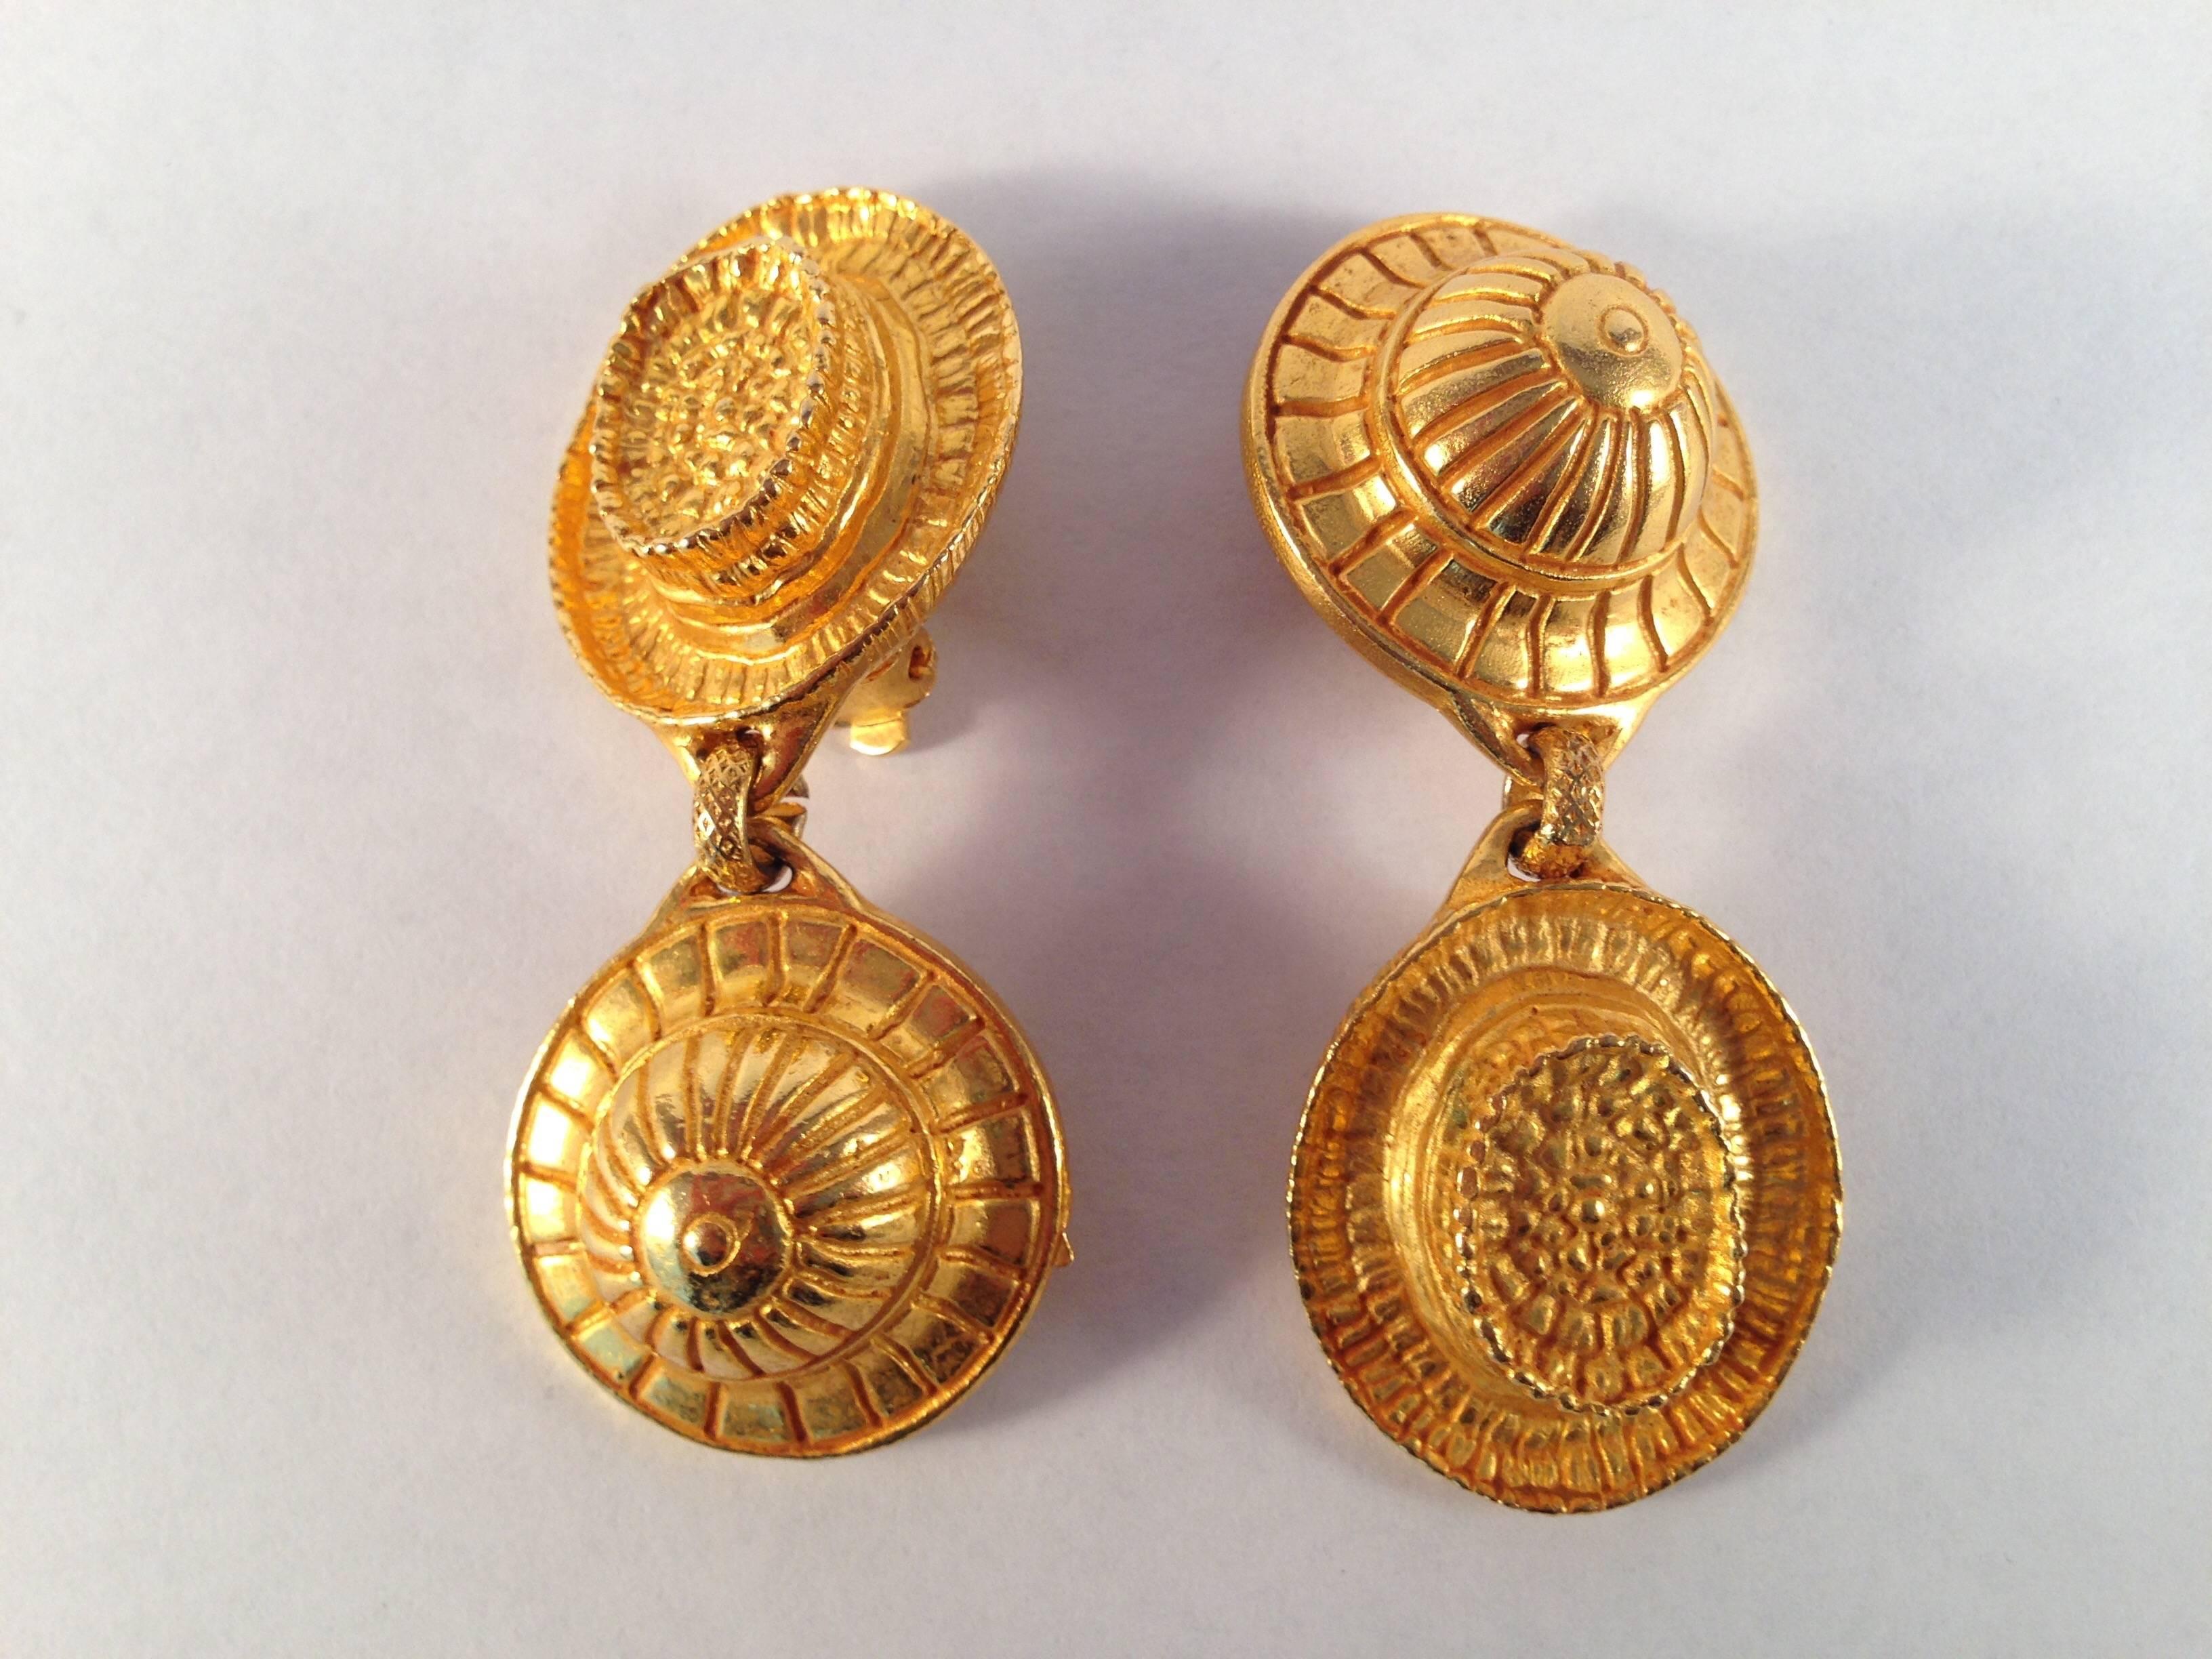 These are vintage Dominique Aurientis earrings featuring two different hats. They measures almost 2 1/2" long x 1" wide. They are marked 'Dominique Aurientis Paris' on a round metal tag on the back (see photo #4). They date from the 1980s